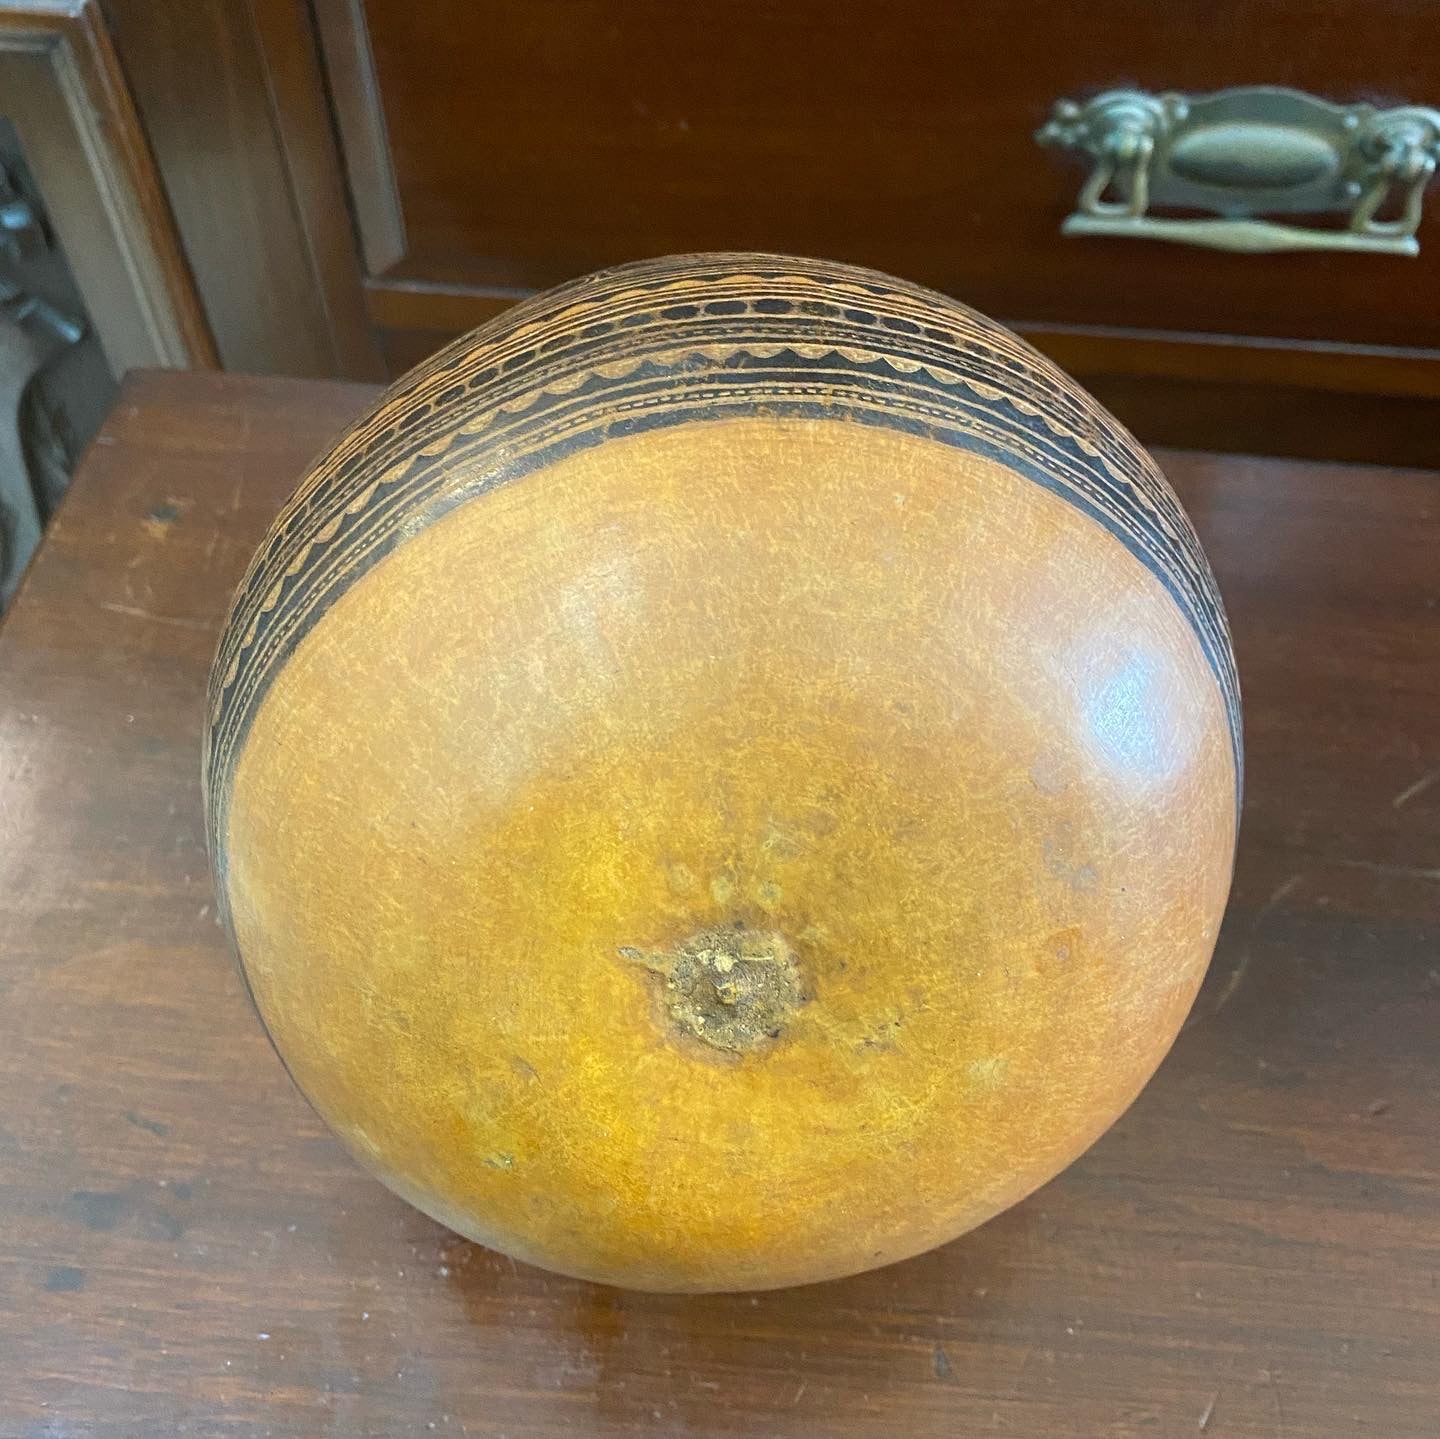 Very Old Vintage Lime Container Gourd from Trobriand Island, Papua New Guinea